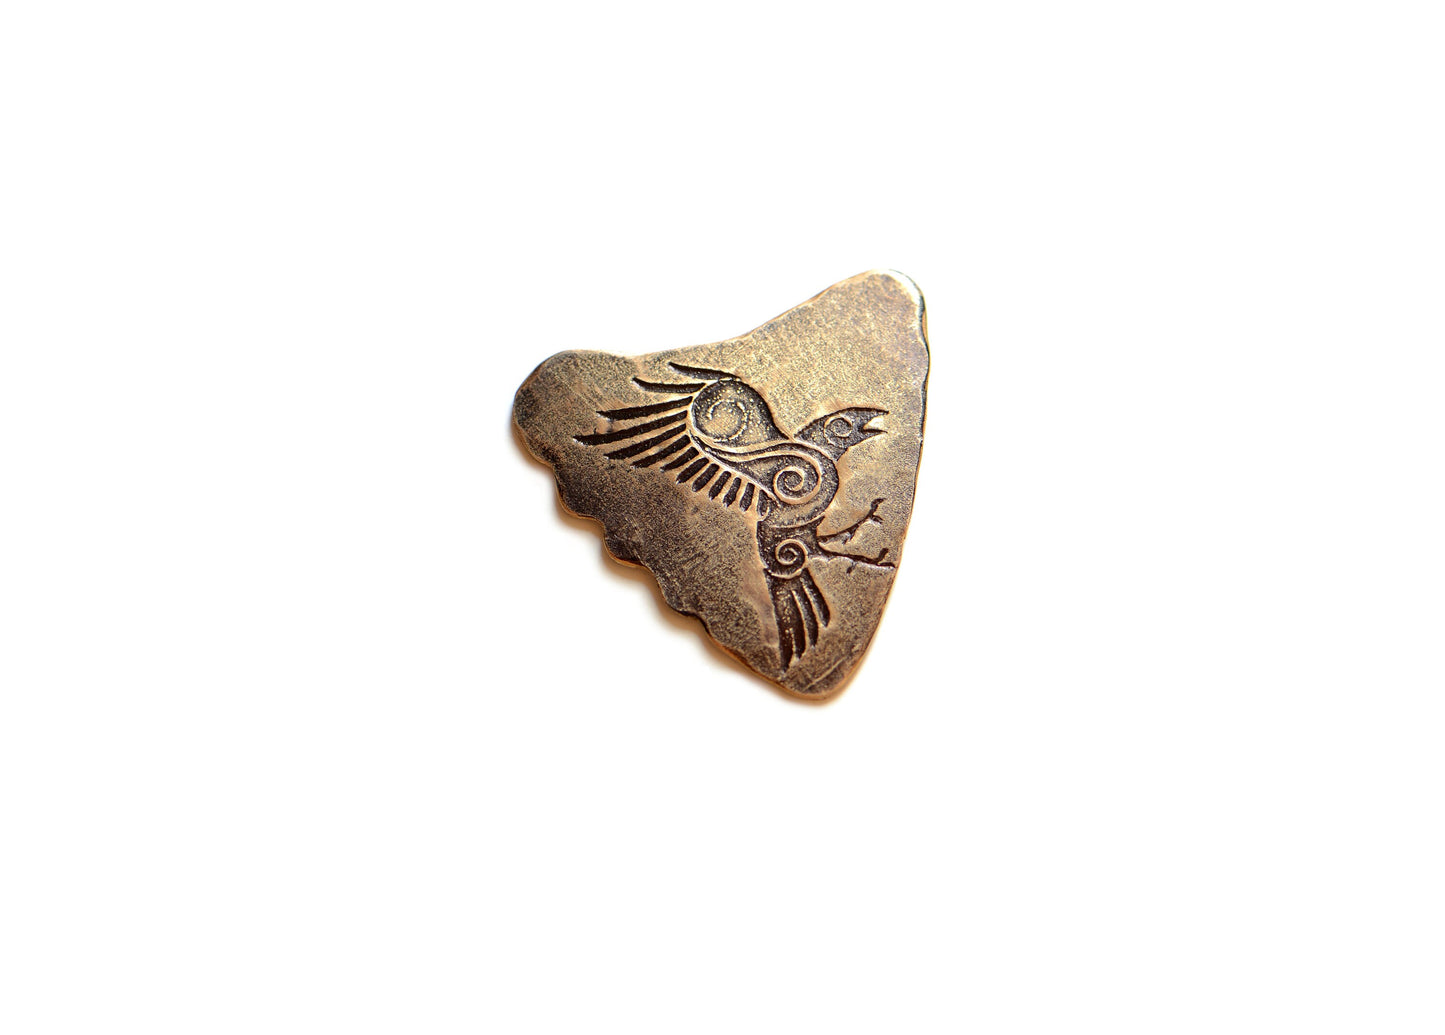 Shark fin bronze guitar pick with Norse raven